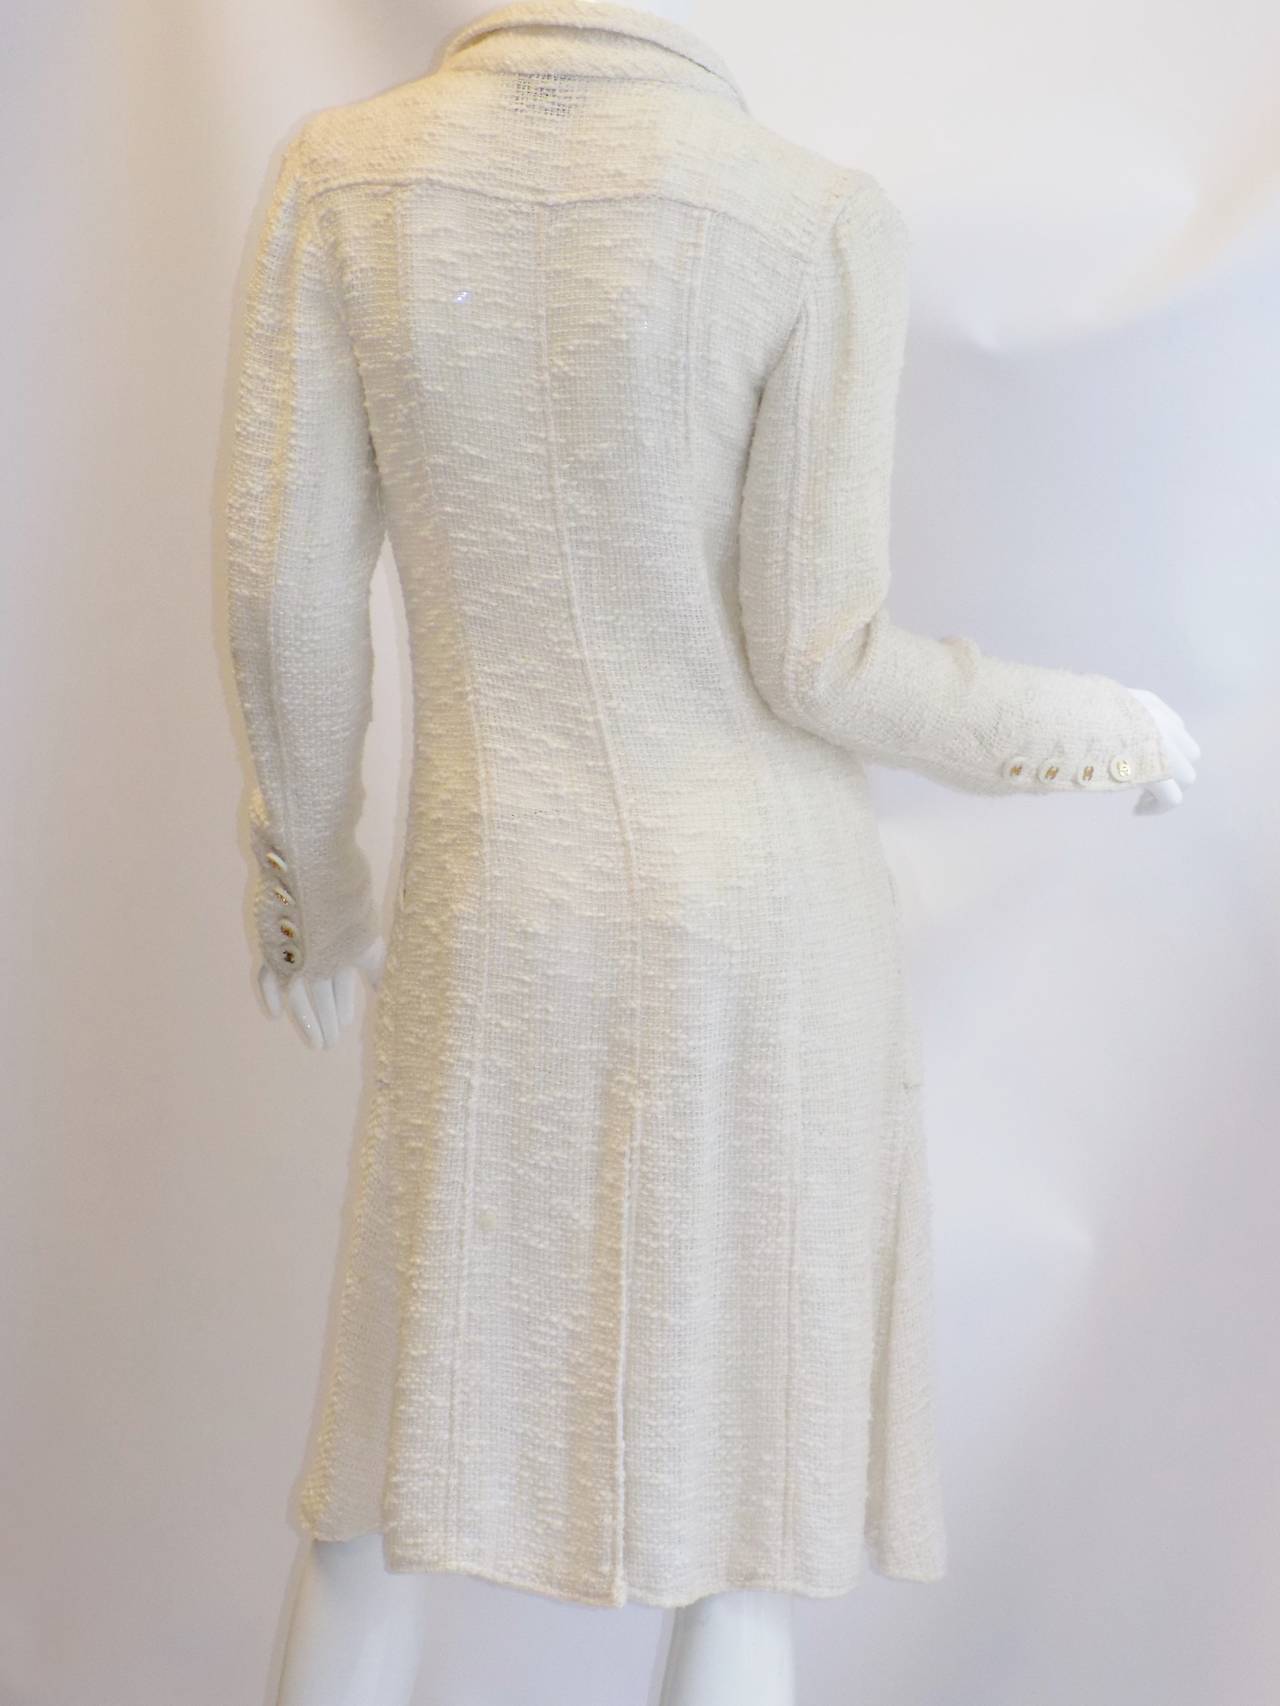 Chanel catwalk vintage winter white  coat dress duster In Excellent Condition In New York, NY